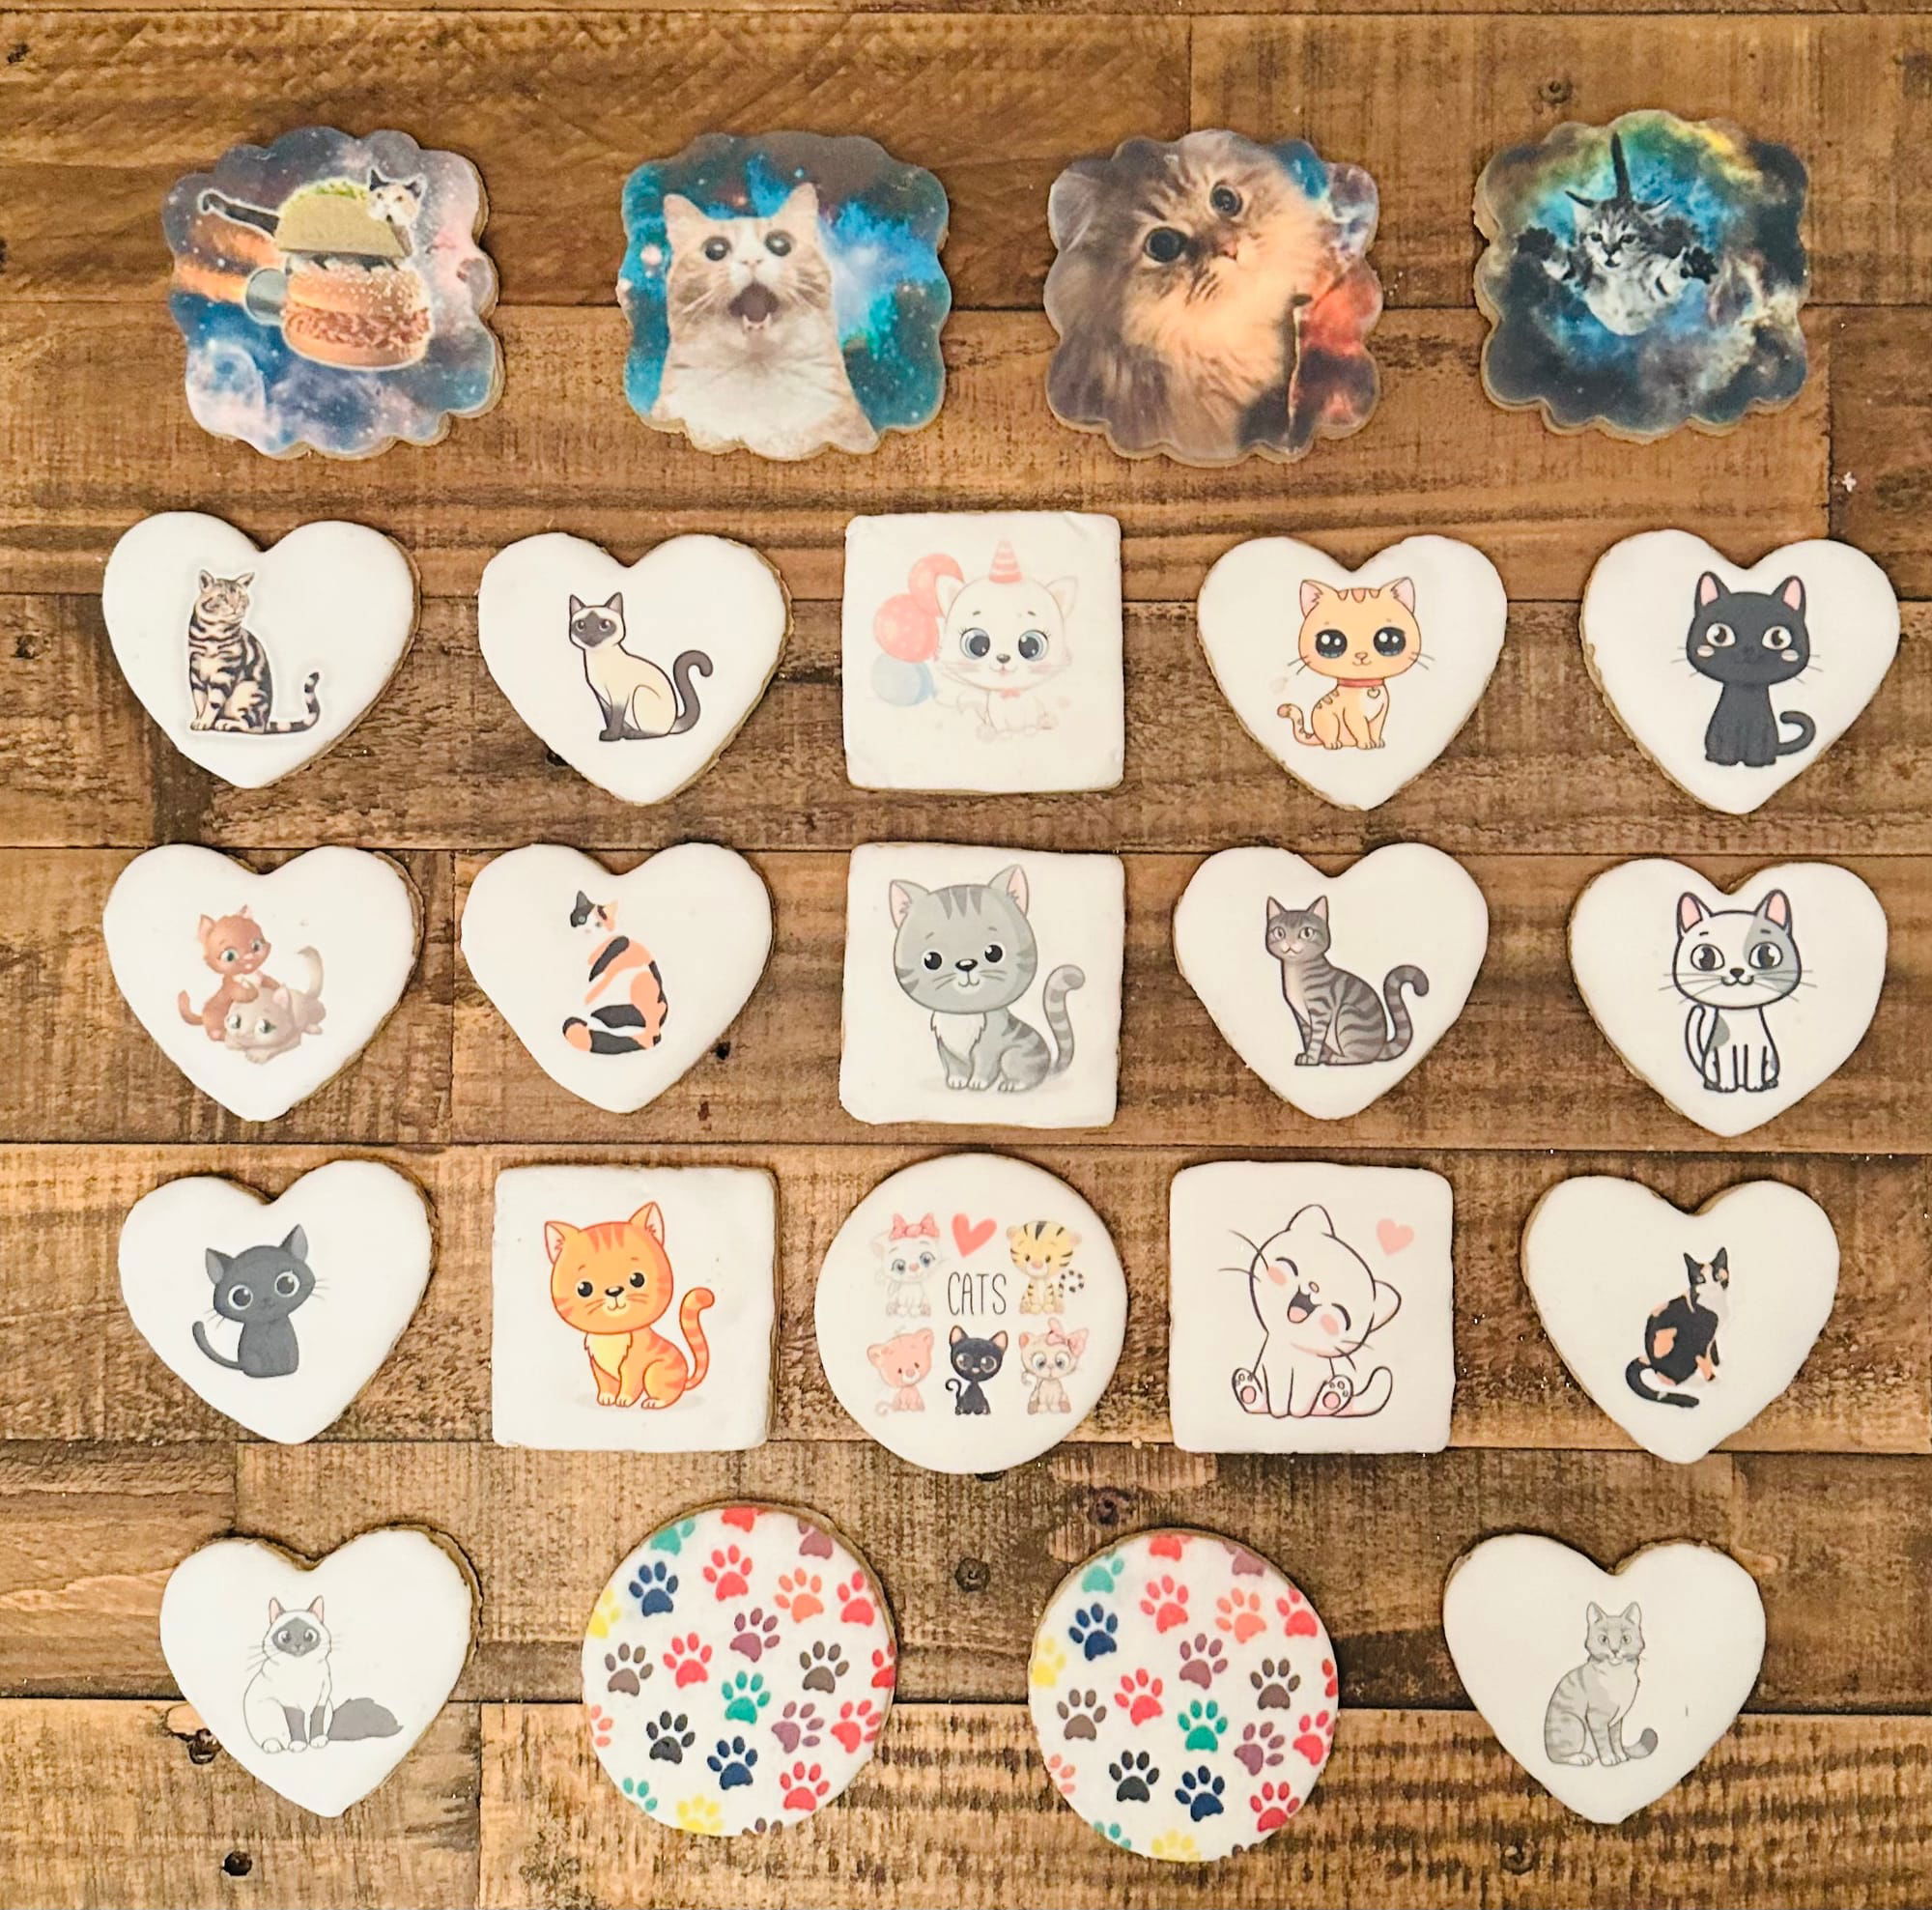 Cat Royal Icing Sugar Cookies with Images